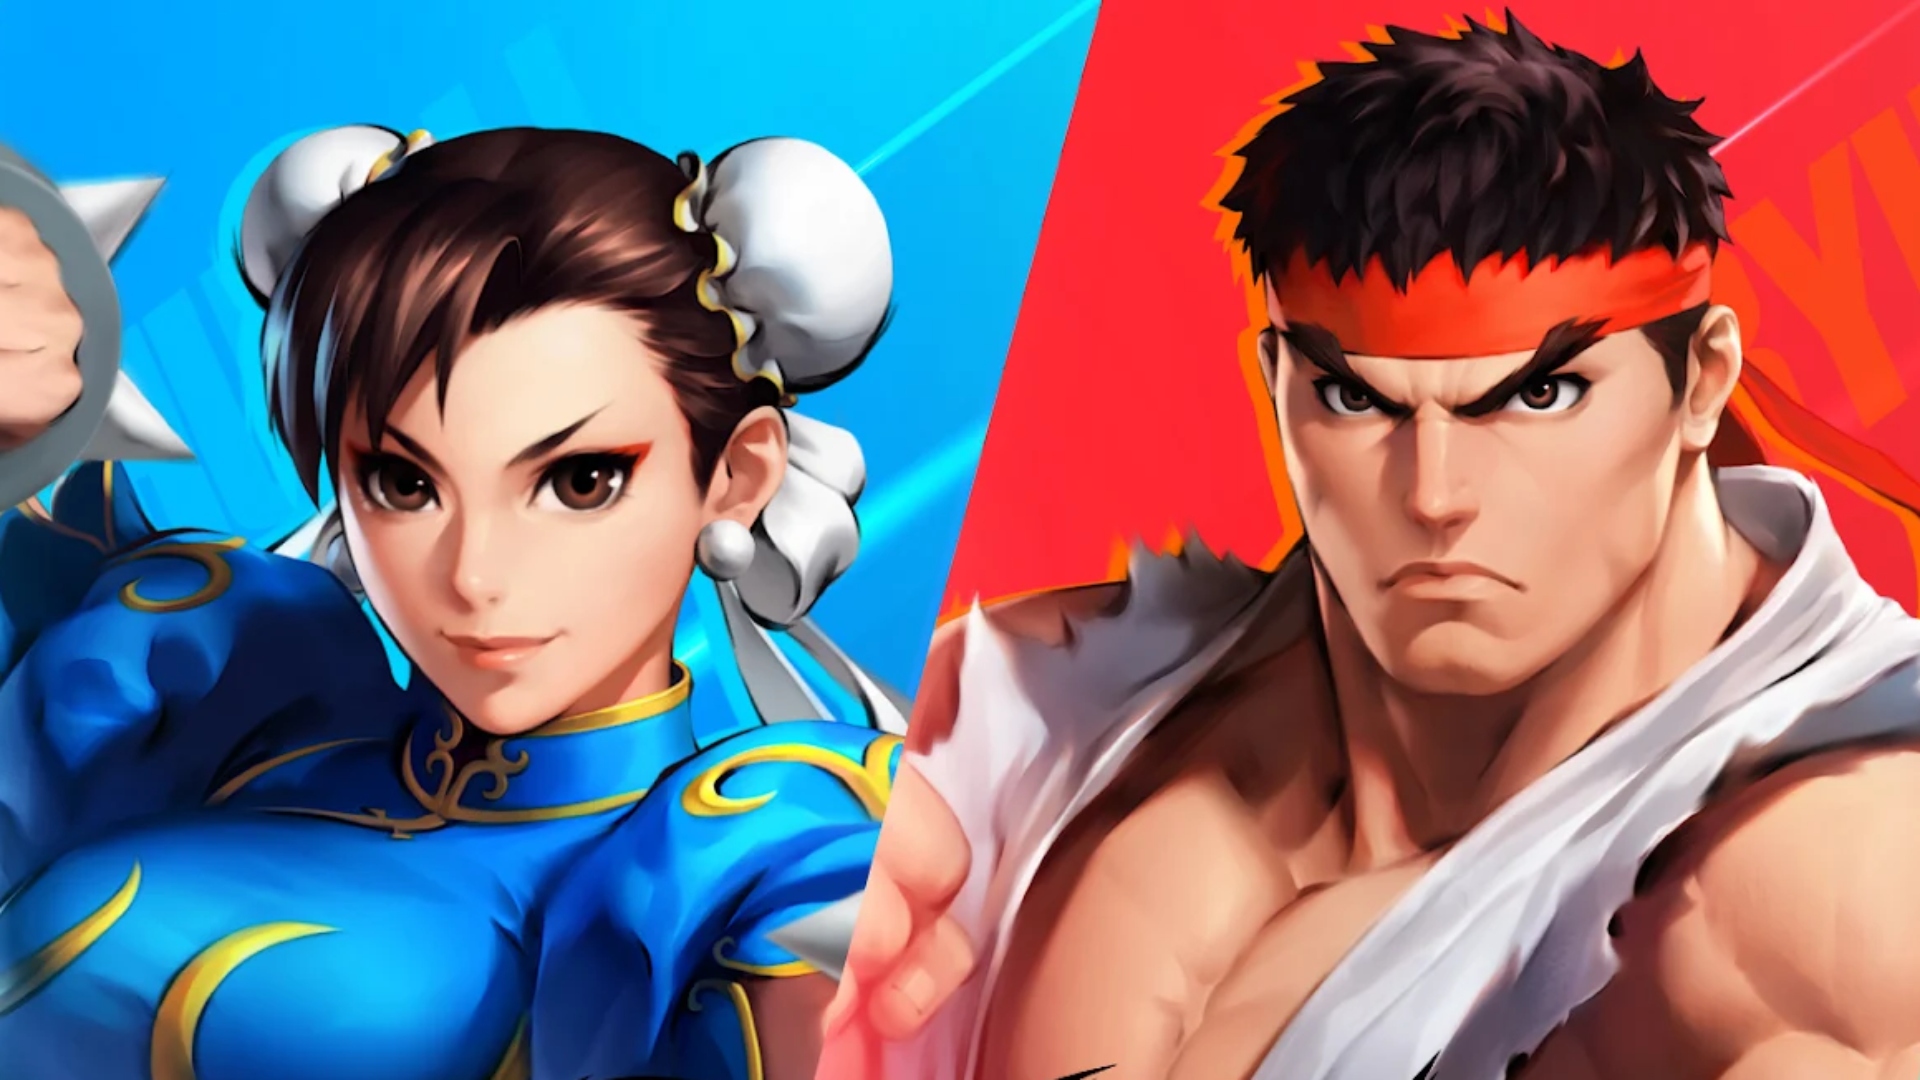 Exclusive: Street Fighter: Duel Is a New Mobile RPG Set to Be